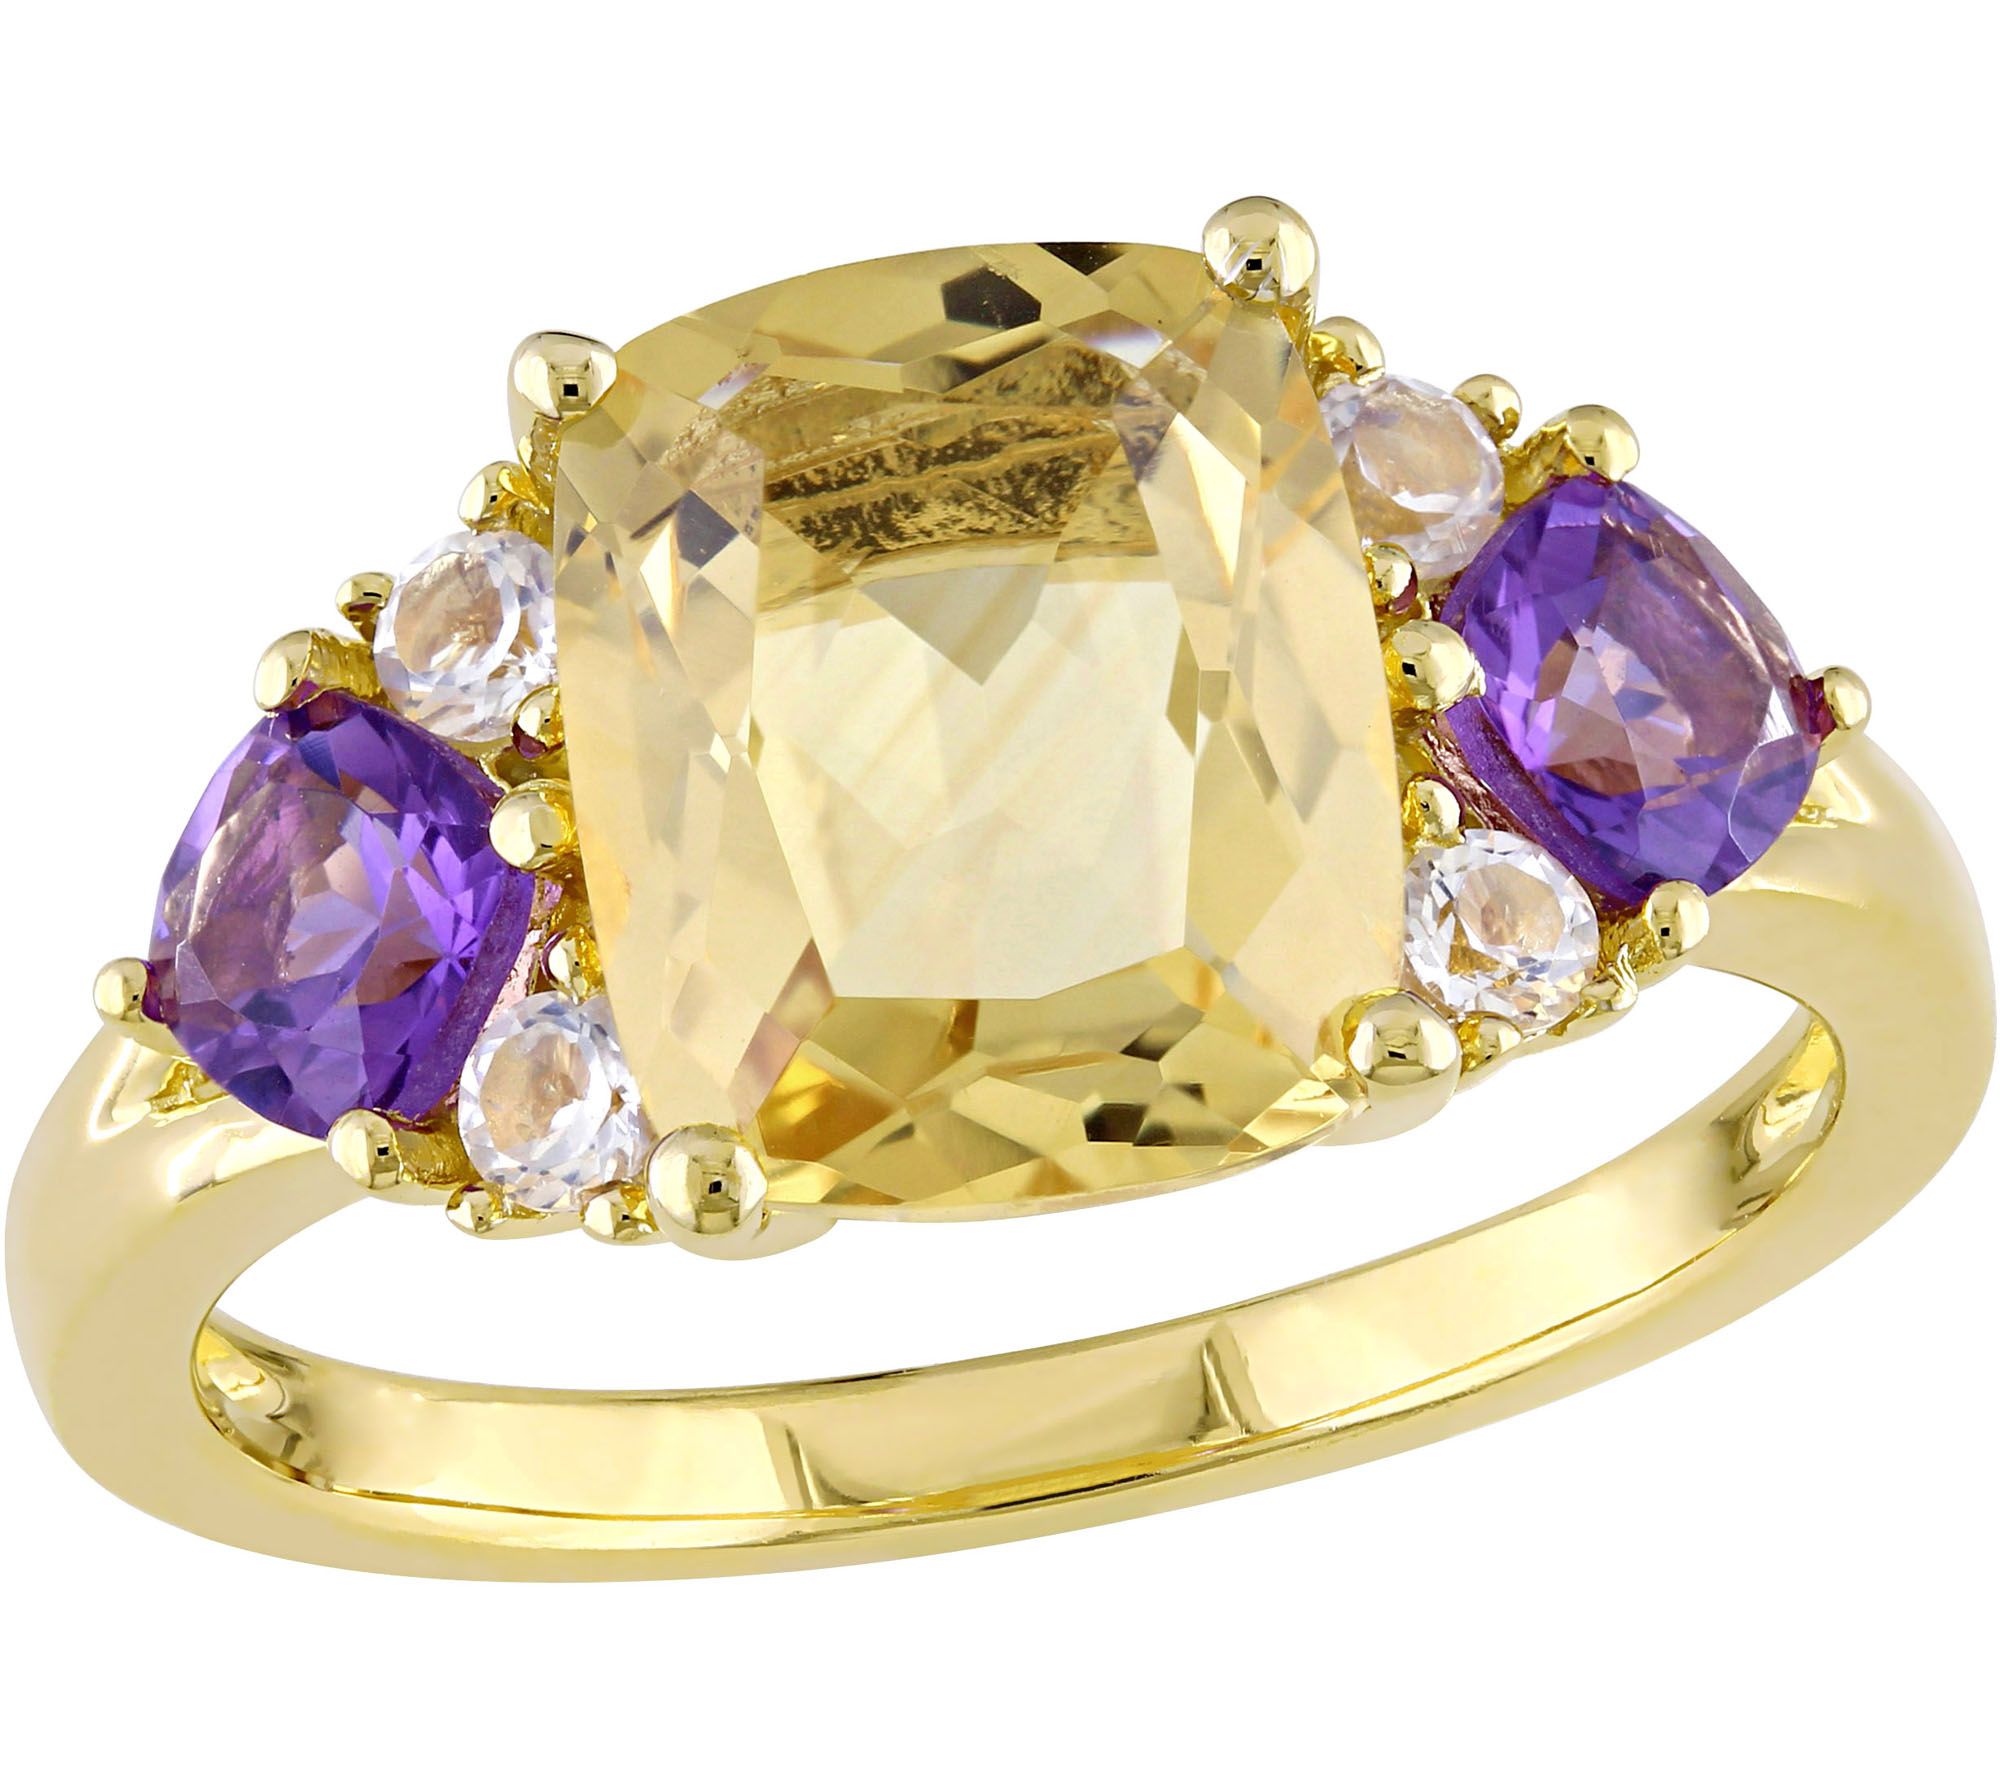 Sterling 3.30 cttw Citrine and Amethyst Ring - QVC.com